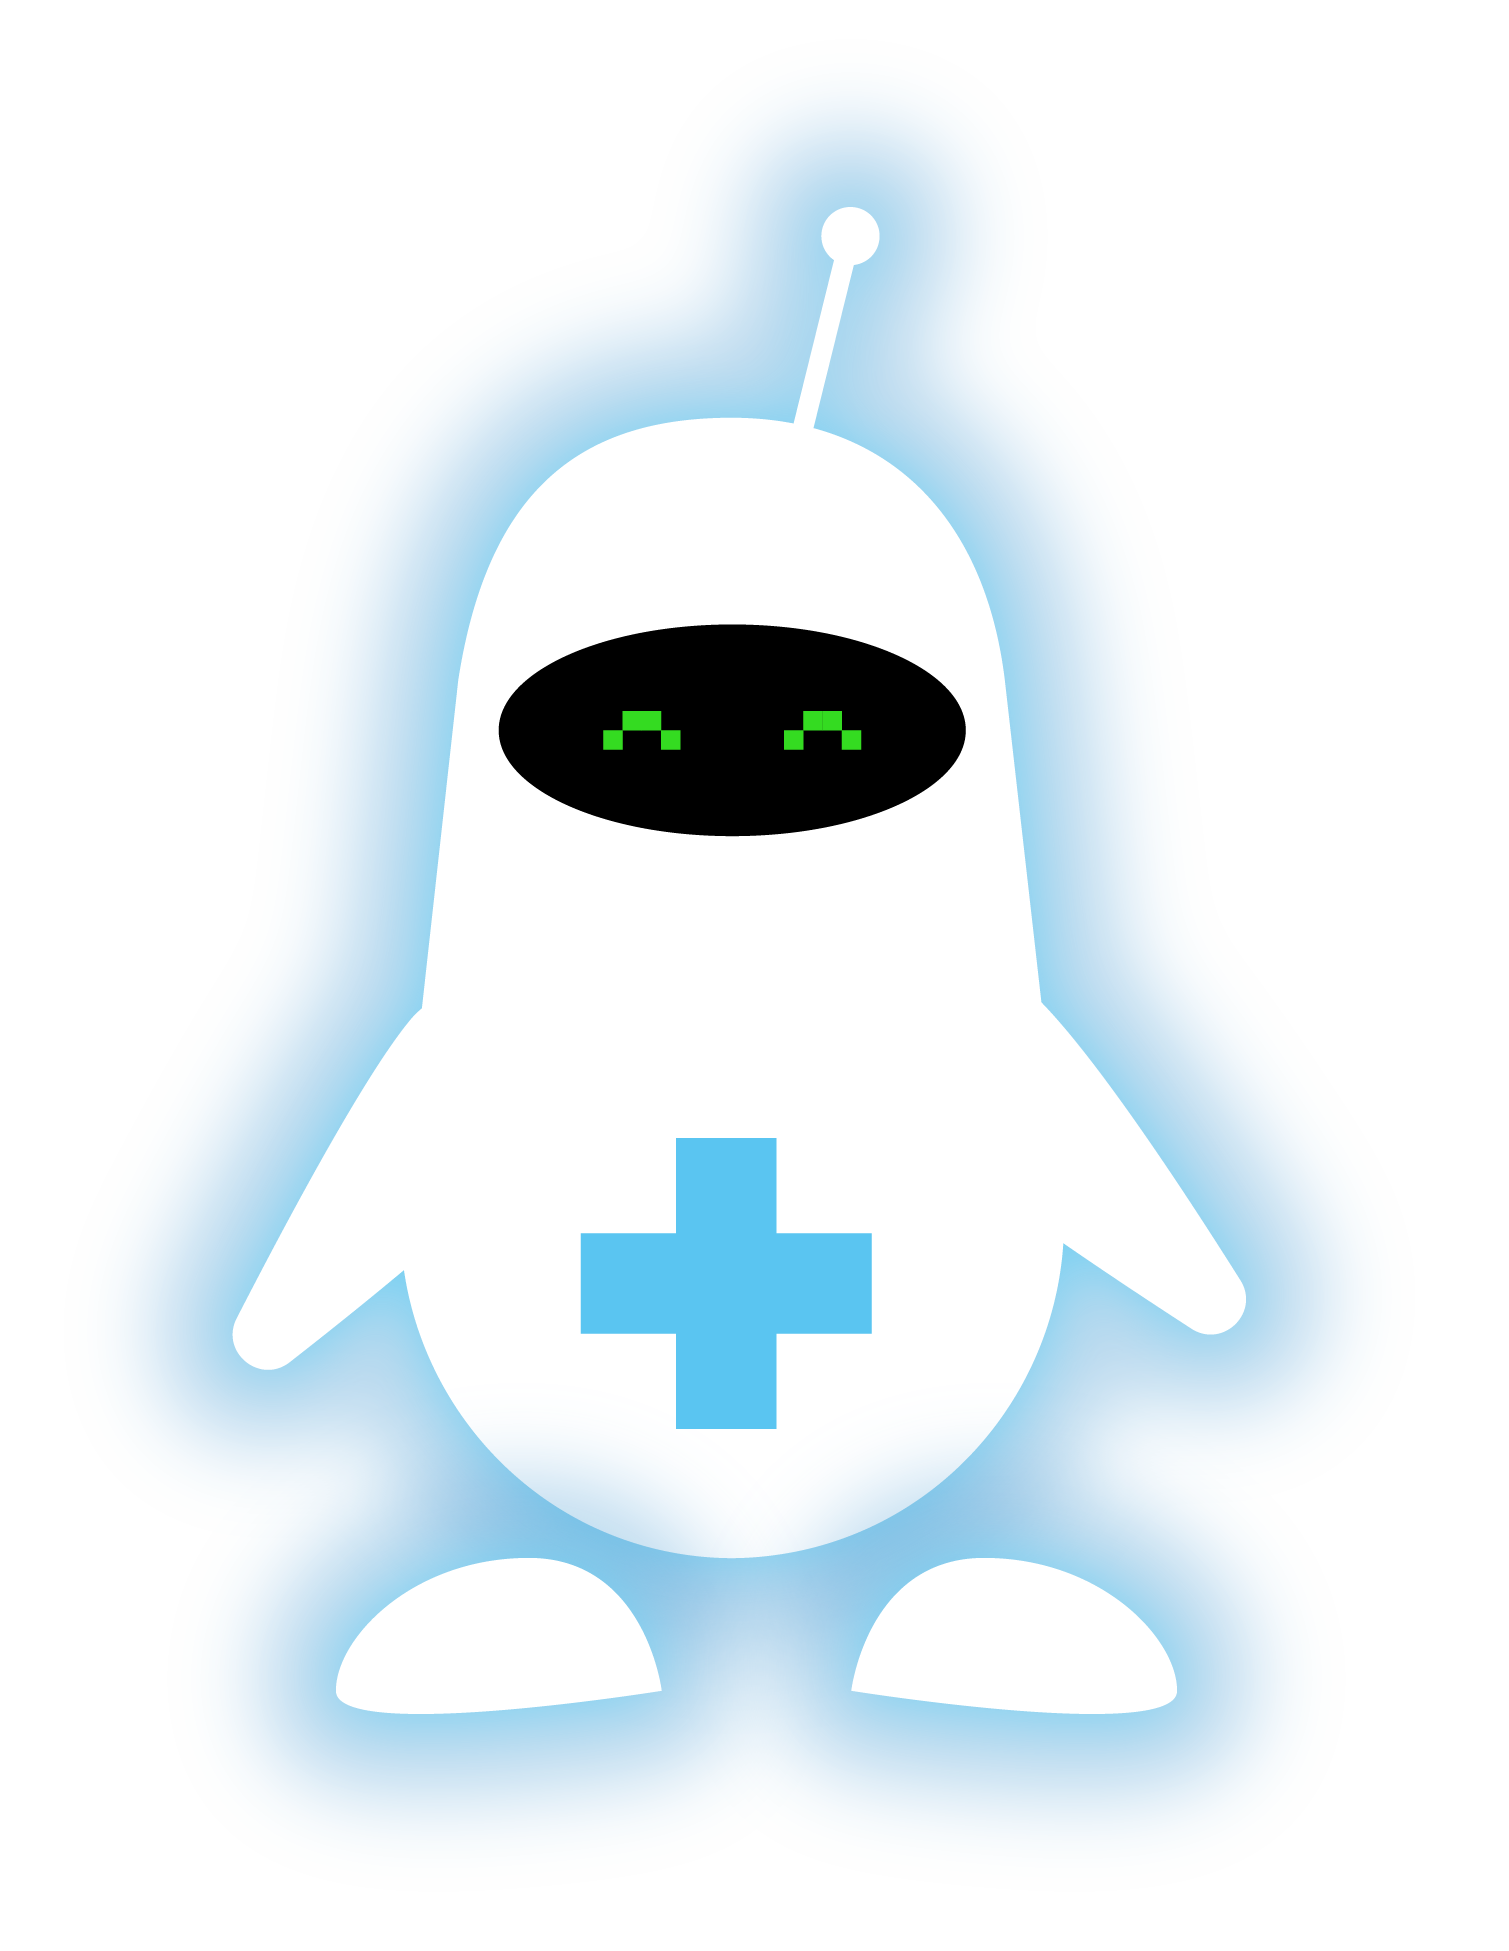 DoctorCyber_Blue.png